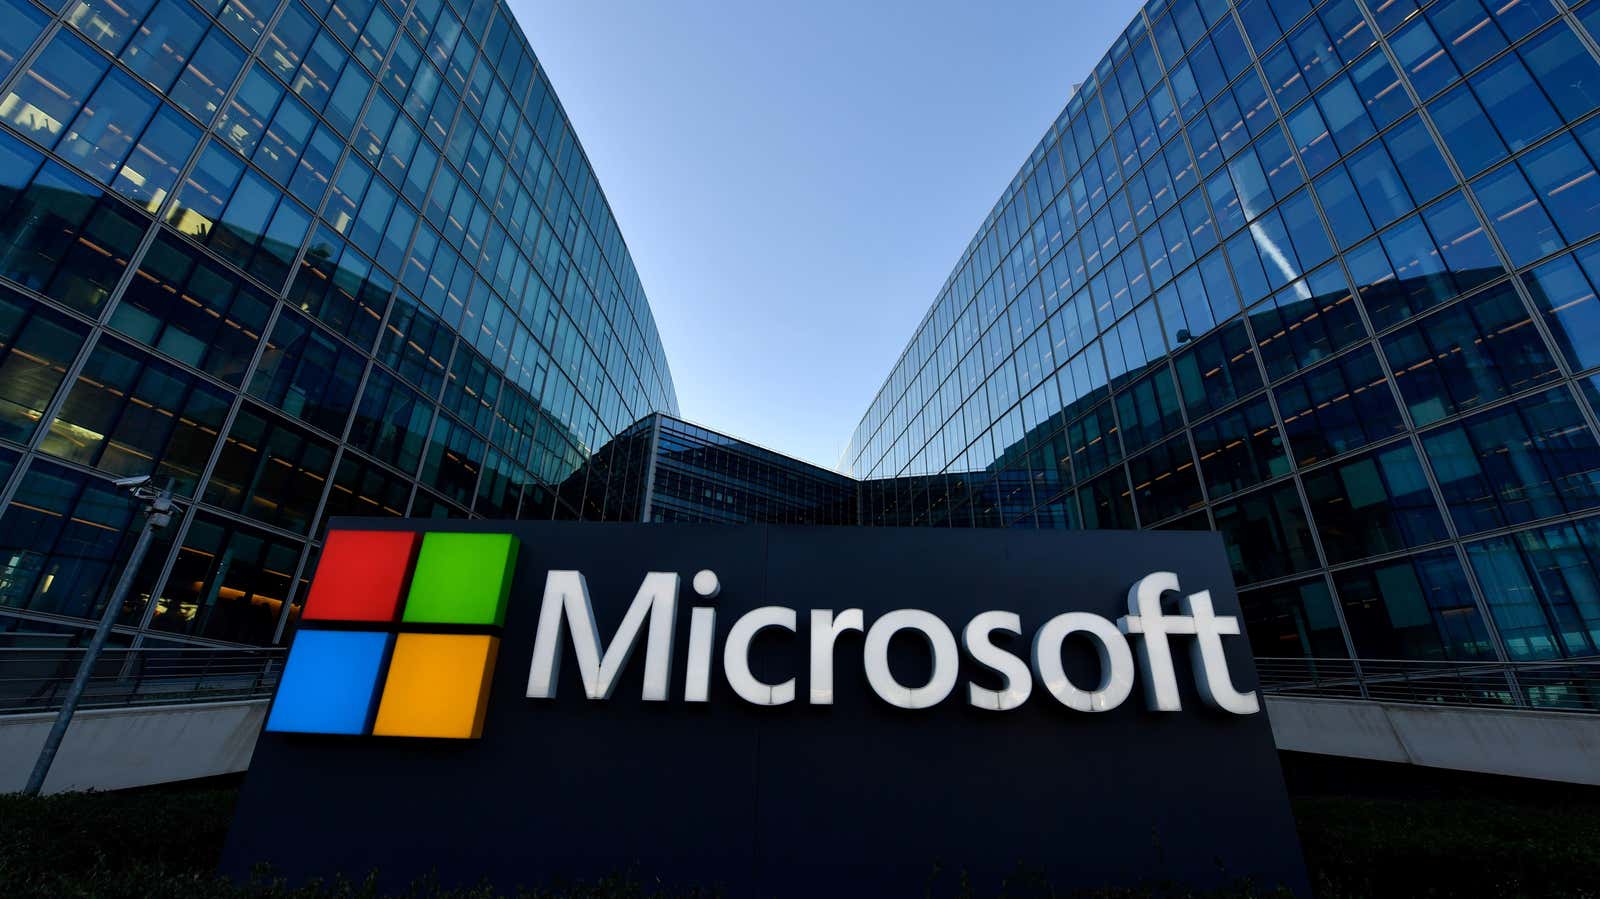 Microsoft Outlook Compromised by Chinese Hacker “HAFNIUM”